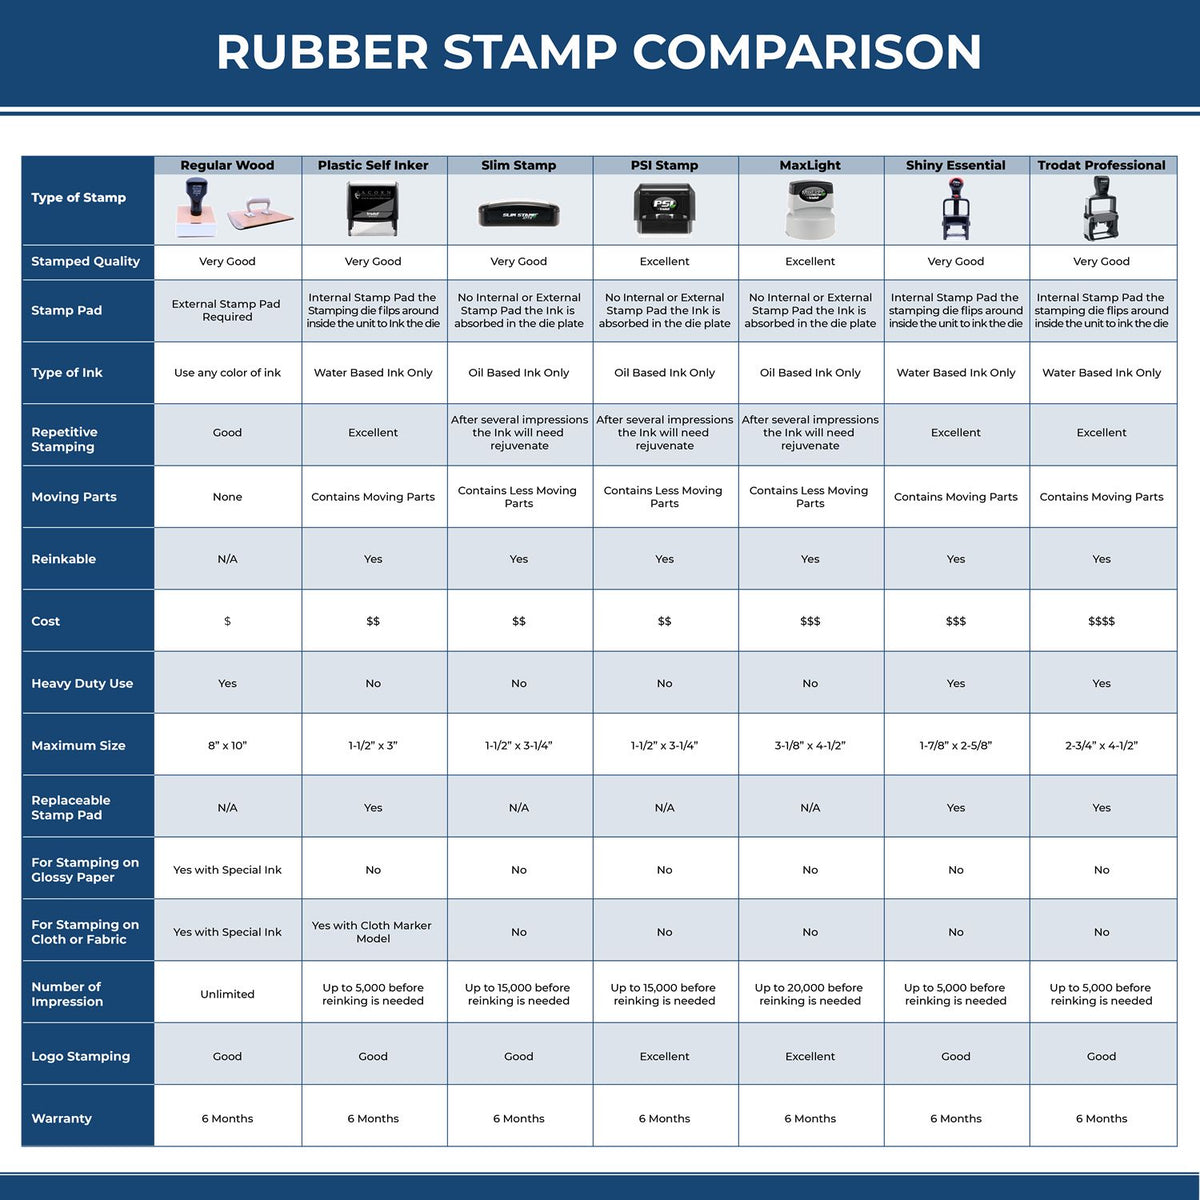 Large Self-Inking Your Insurance has Paid their Portion Stamp 4980S Rubber Stamp Comparison